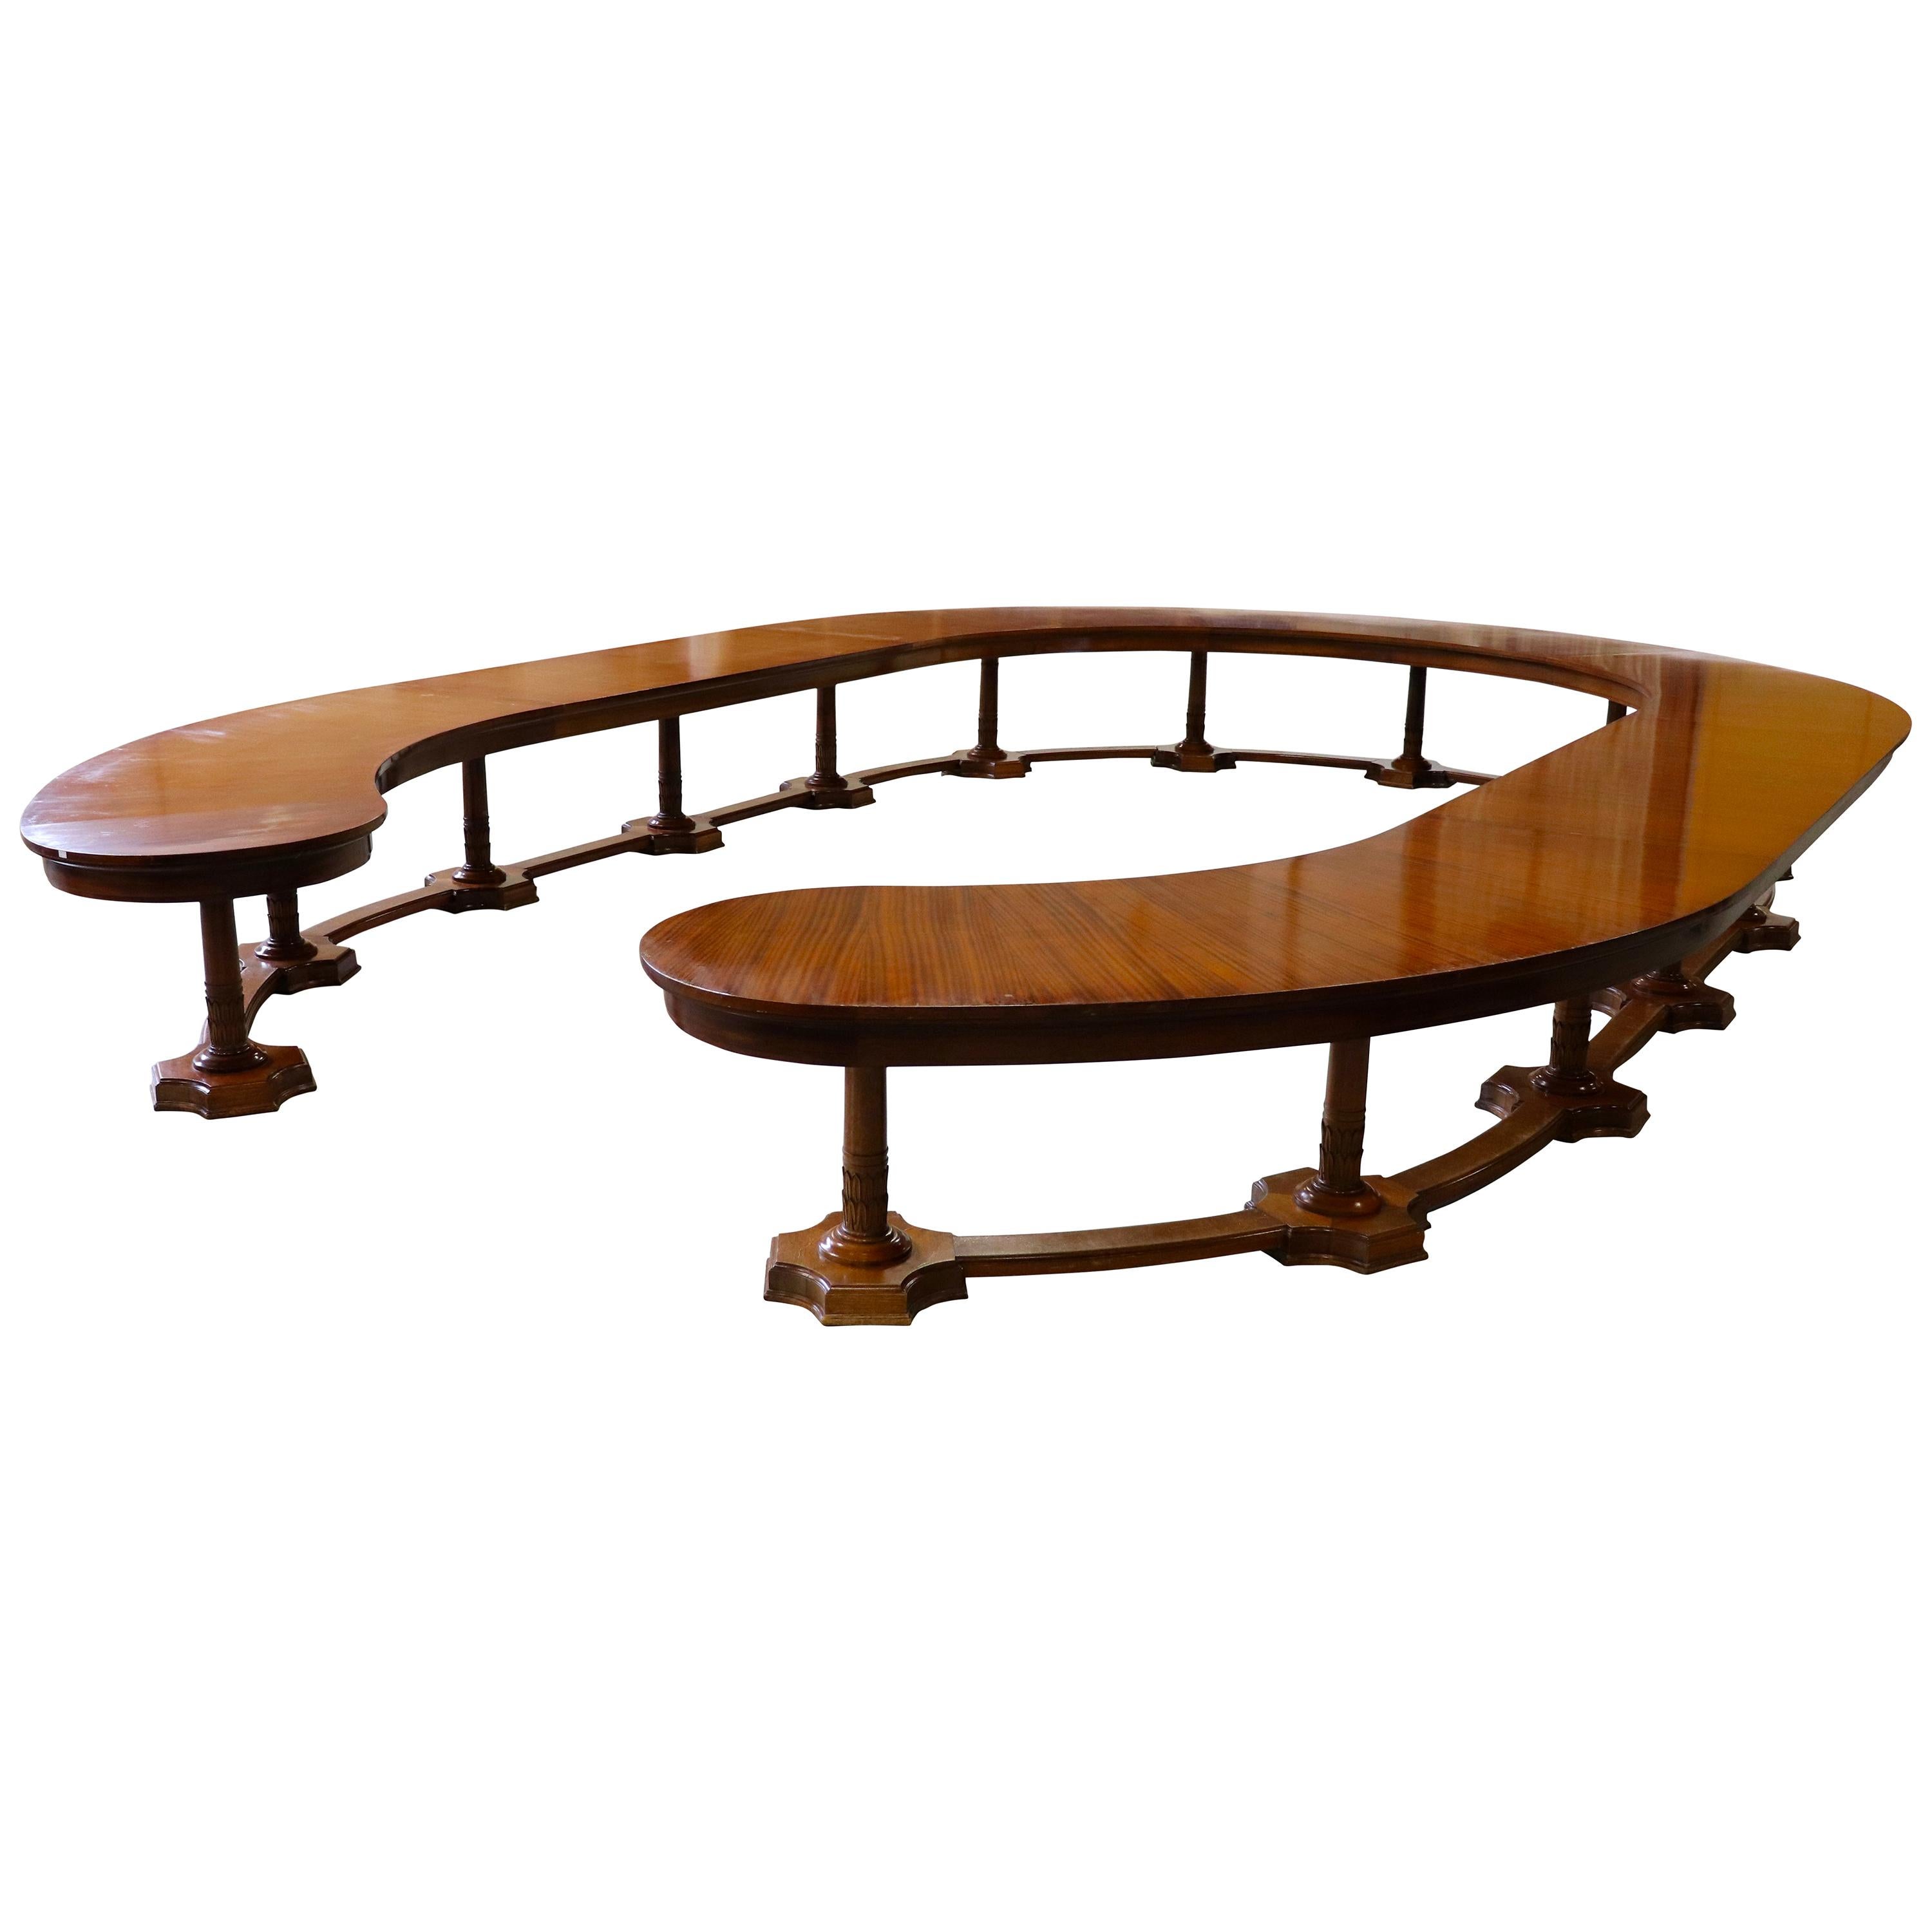 Belgian Mahogany Conference Table, Boardroom Table, circa 1920 For Sale